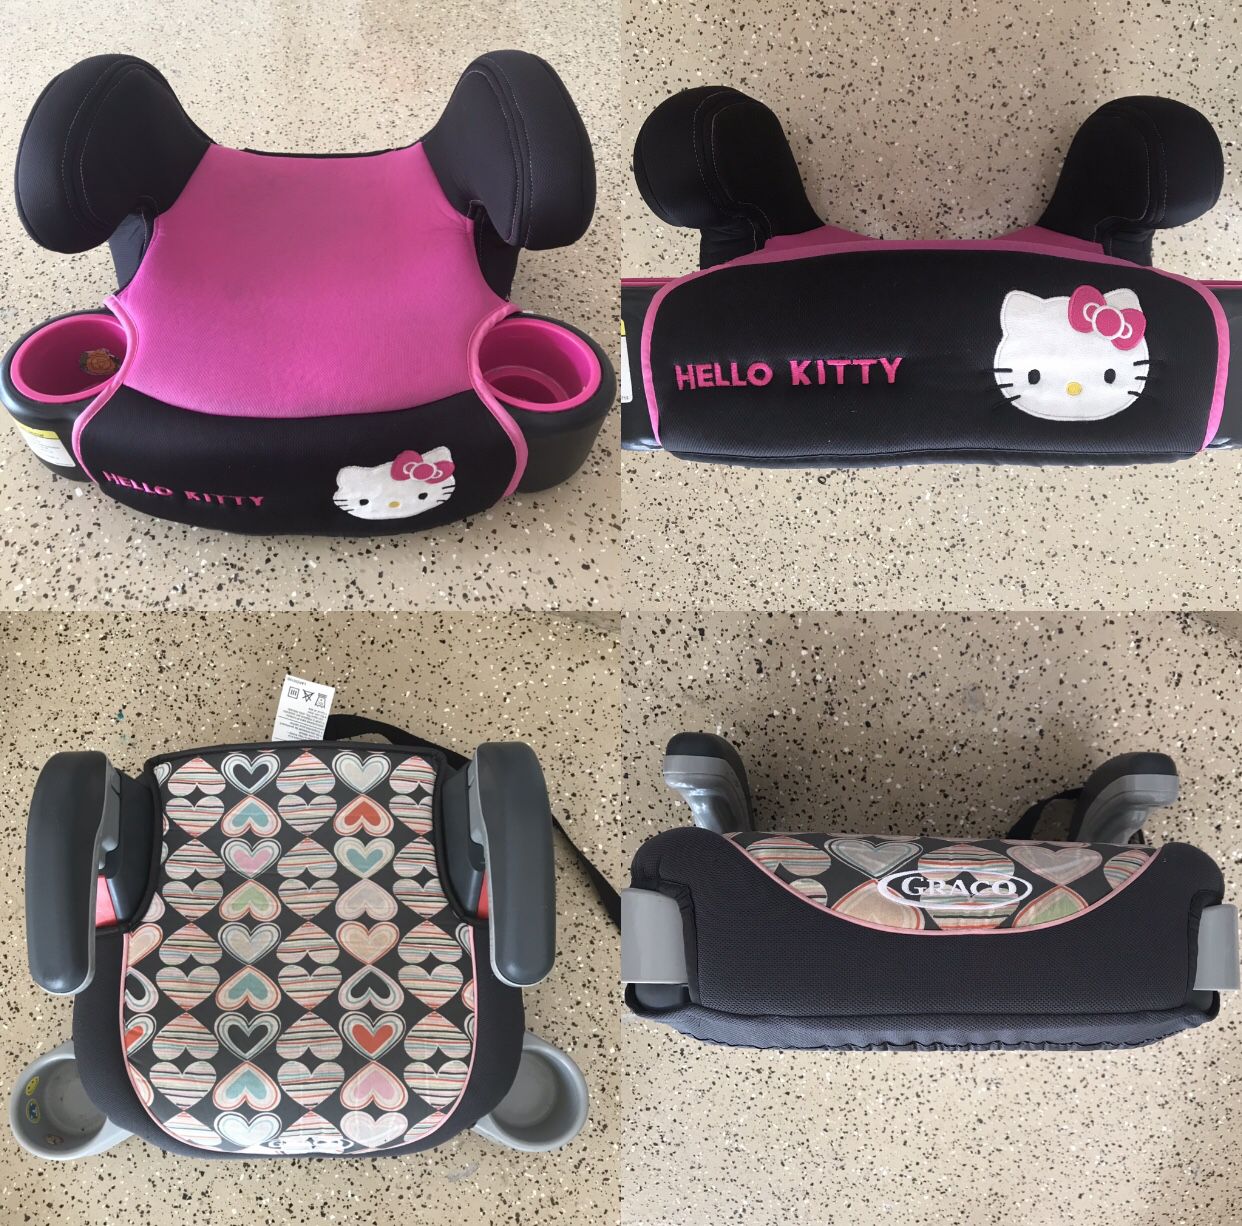 Child Kids Booster Car Seat - two itens for 45.00